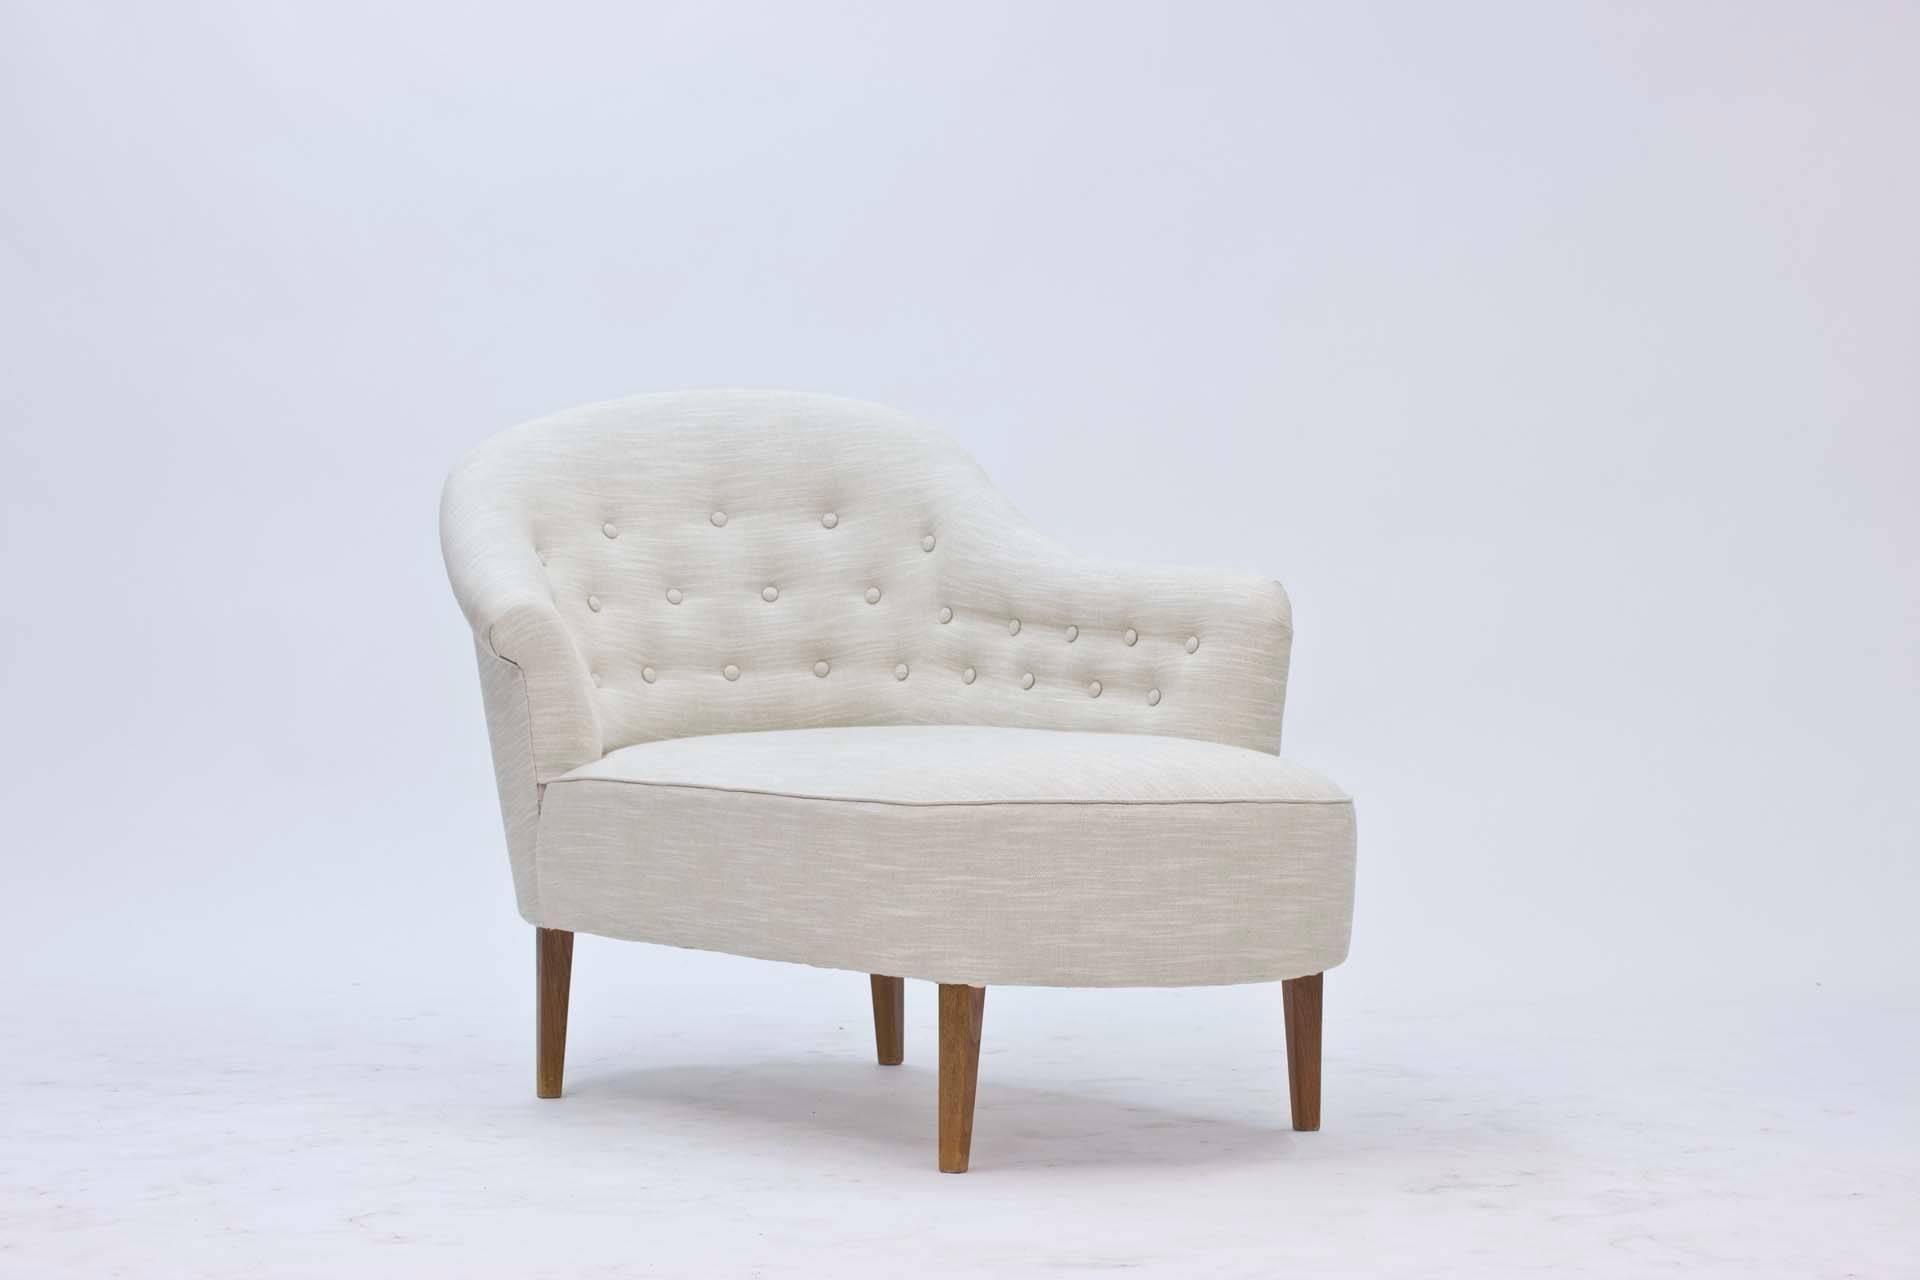 Graceful and beautiful chaise lounge, made in Sweden in the 1950s and upholstered in high quality linen fabric. A pair is available.